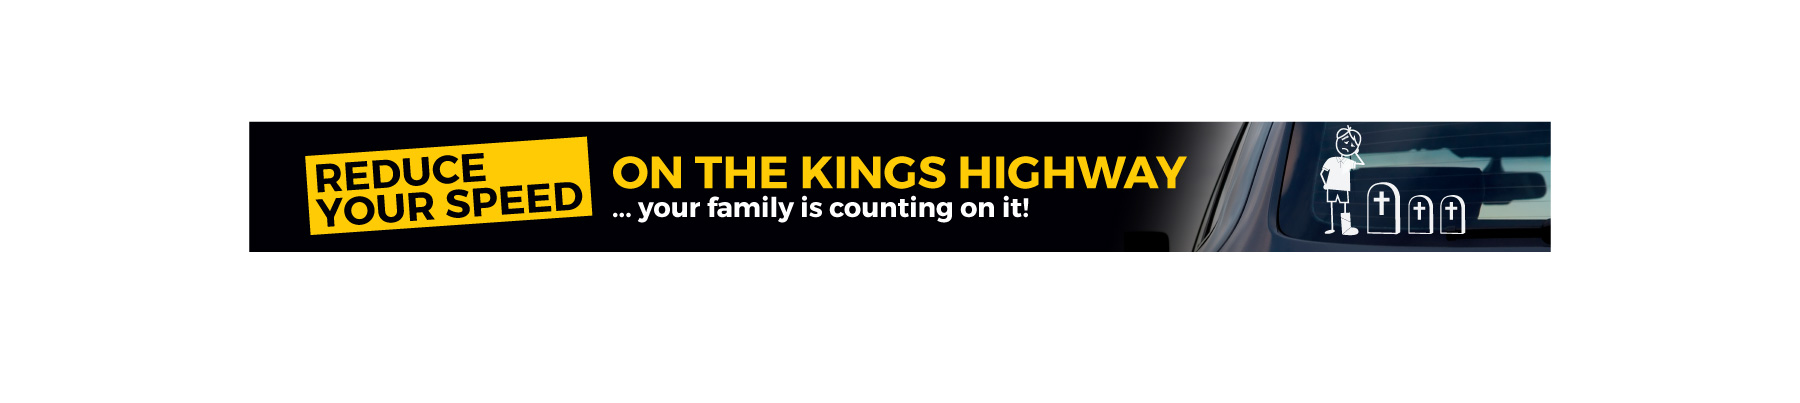 Kings Highway campaign